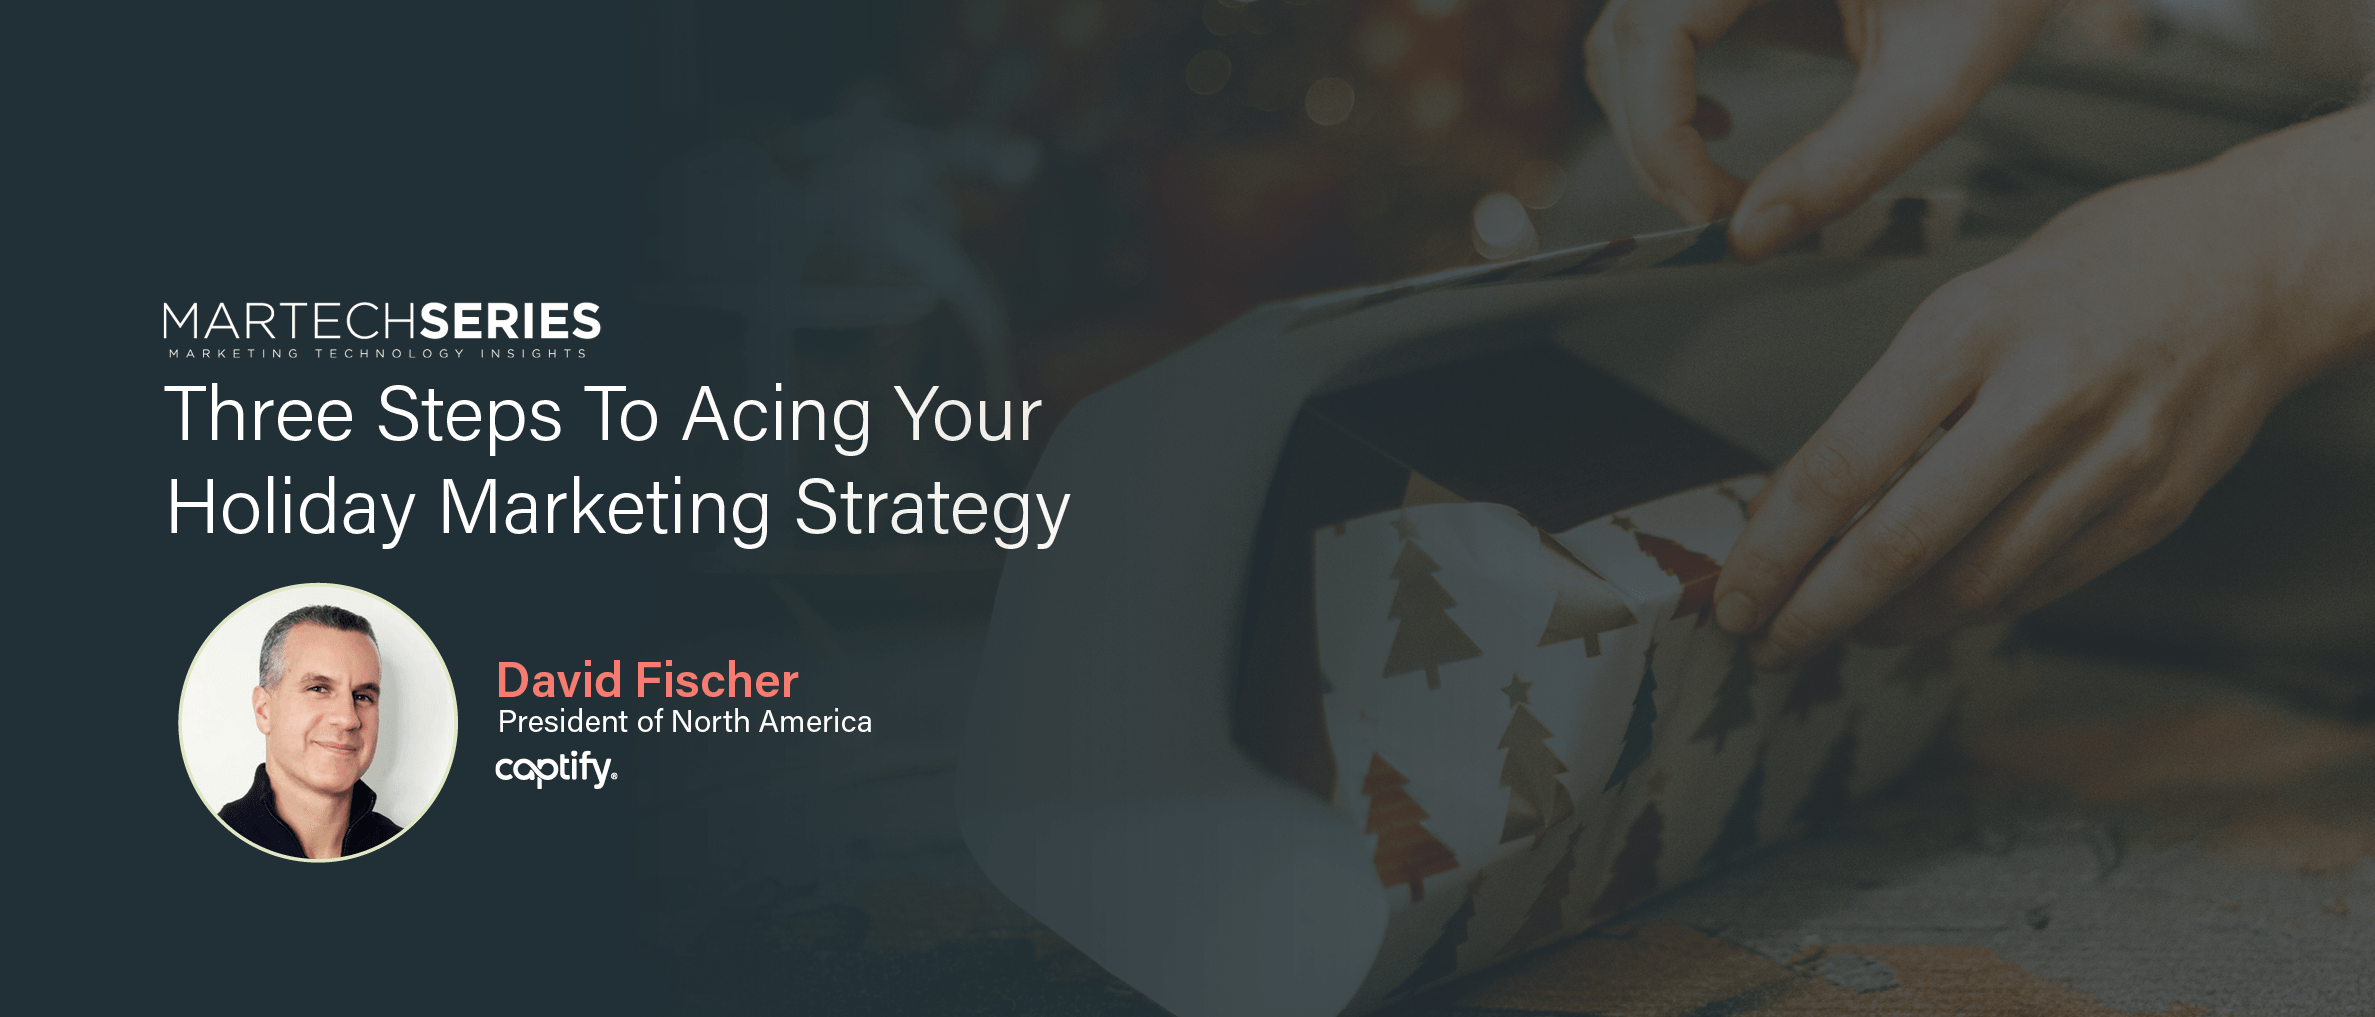 Martech Series: Three Steps To Acing Your Holiday Marketing Strategy